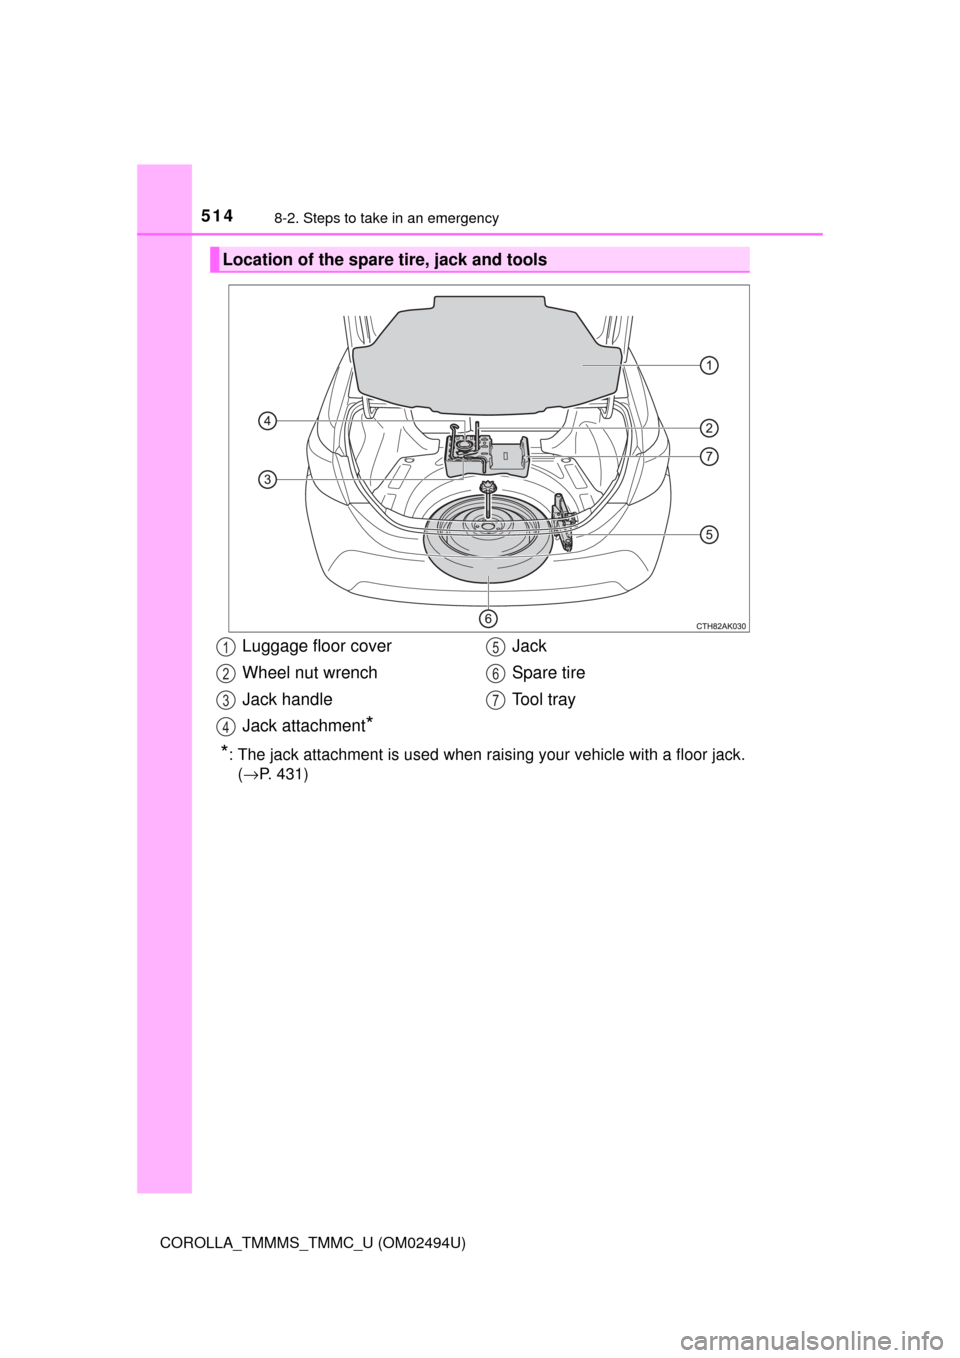 TOYOTA COROLLA 2017 11.G Owners Manual 5148-2. Steps to take in an emergency
COROLLA_TMMMS_TMMC_U (OM02494U)
*: The jack attachment is used when raising your vehicle with a floor jack.
(→P. 431)
Location of the spare tire, jack and tools